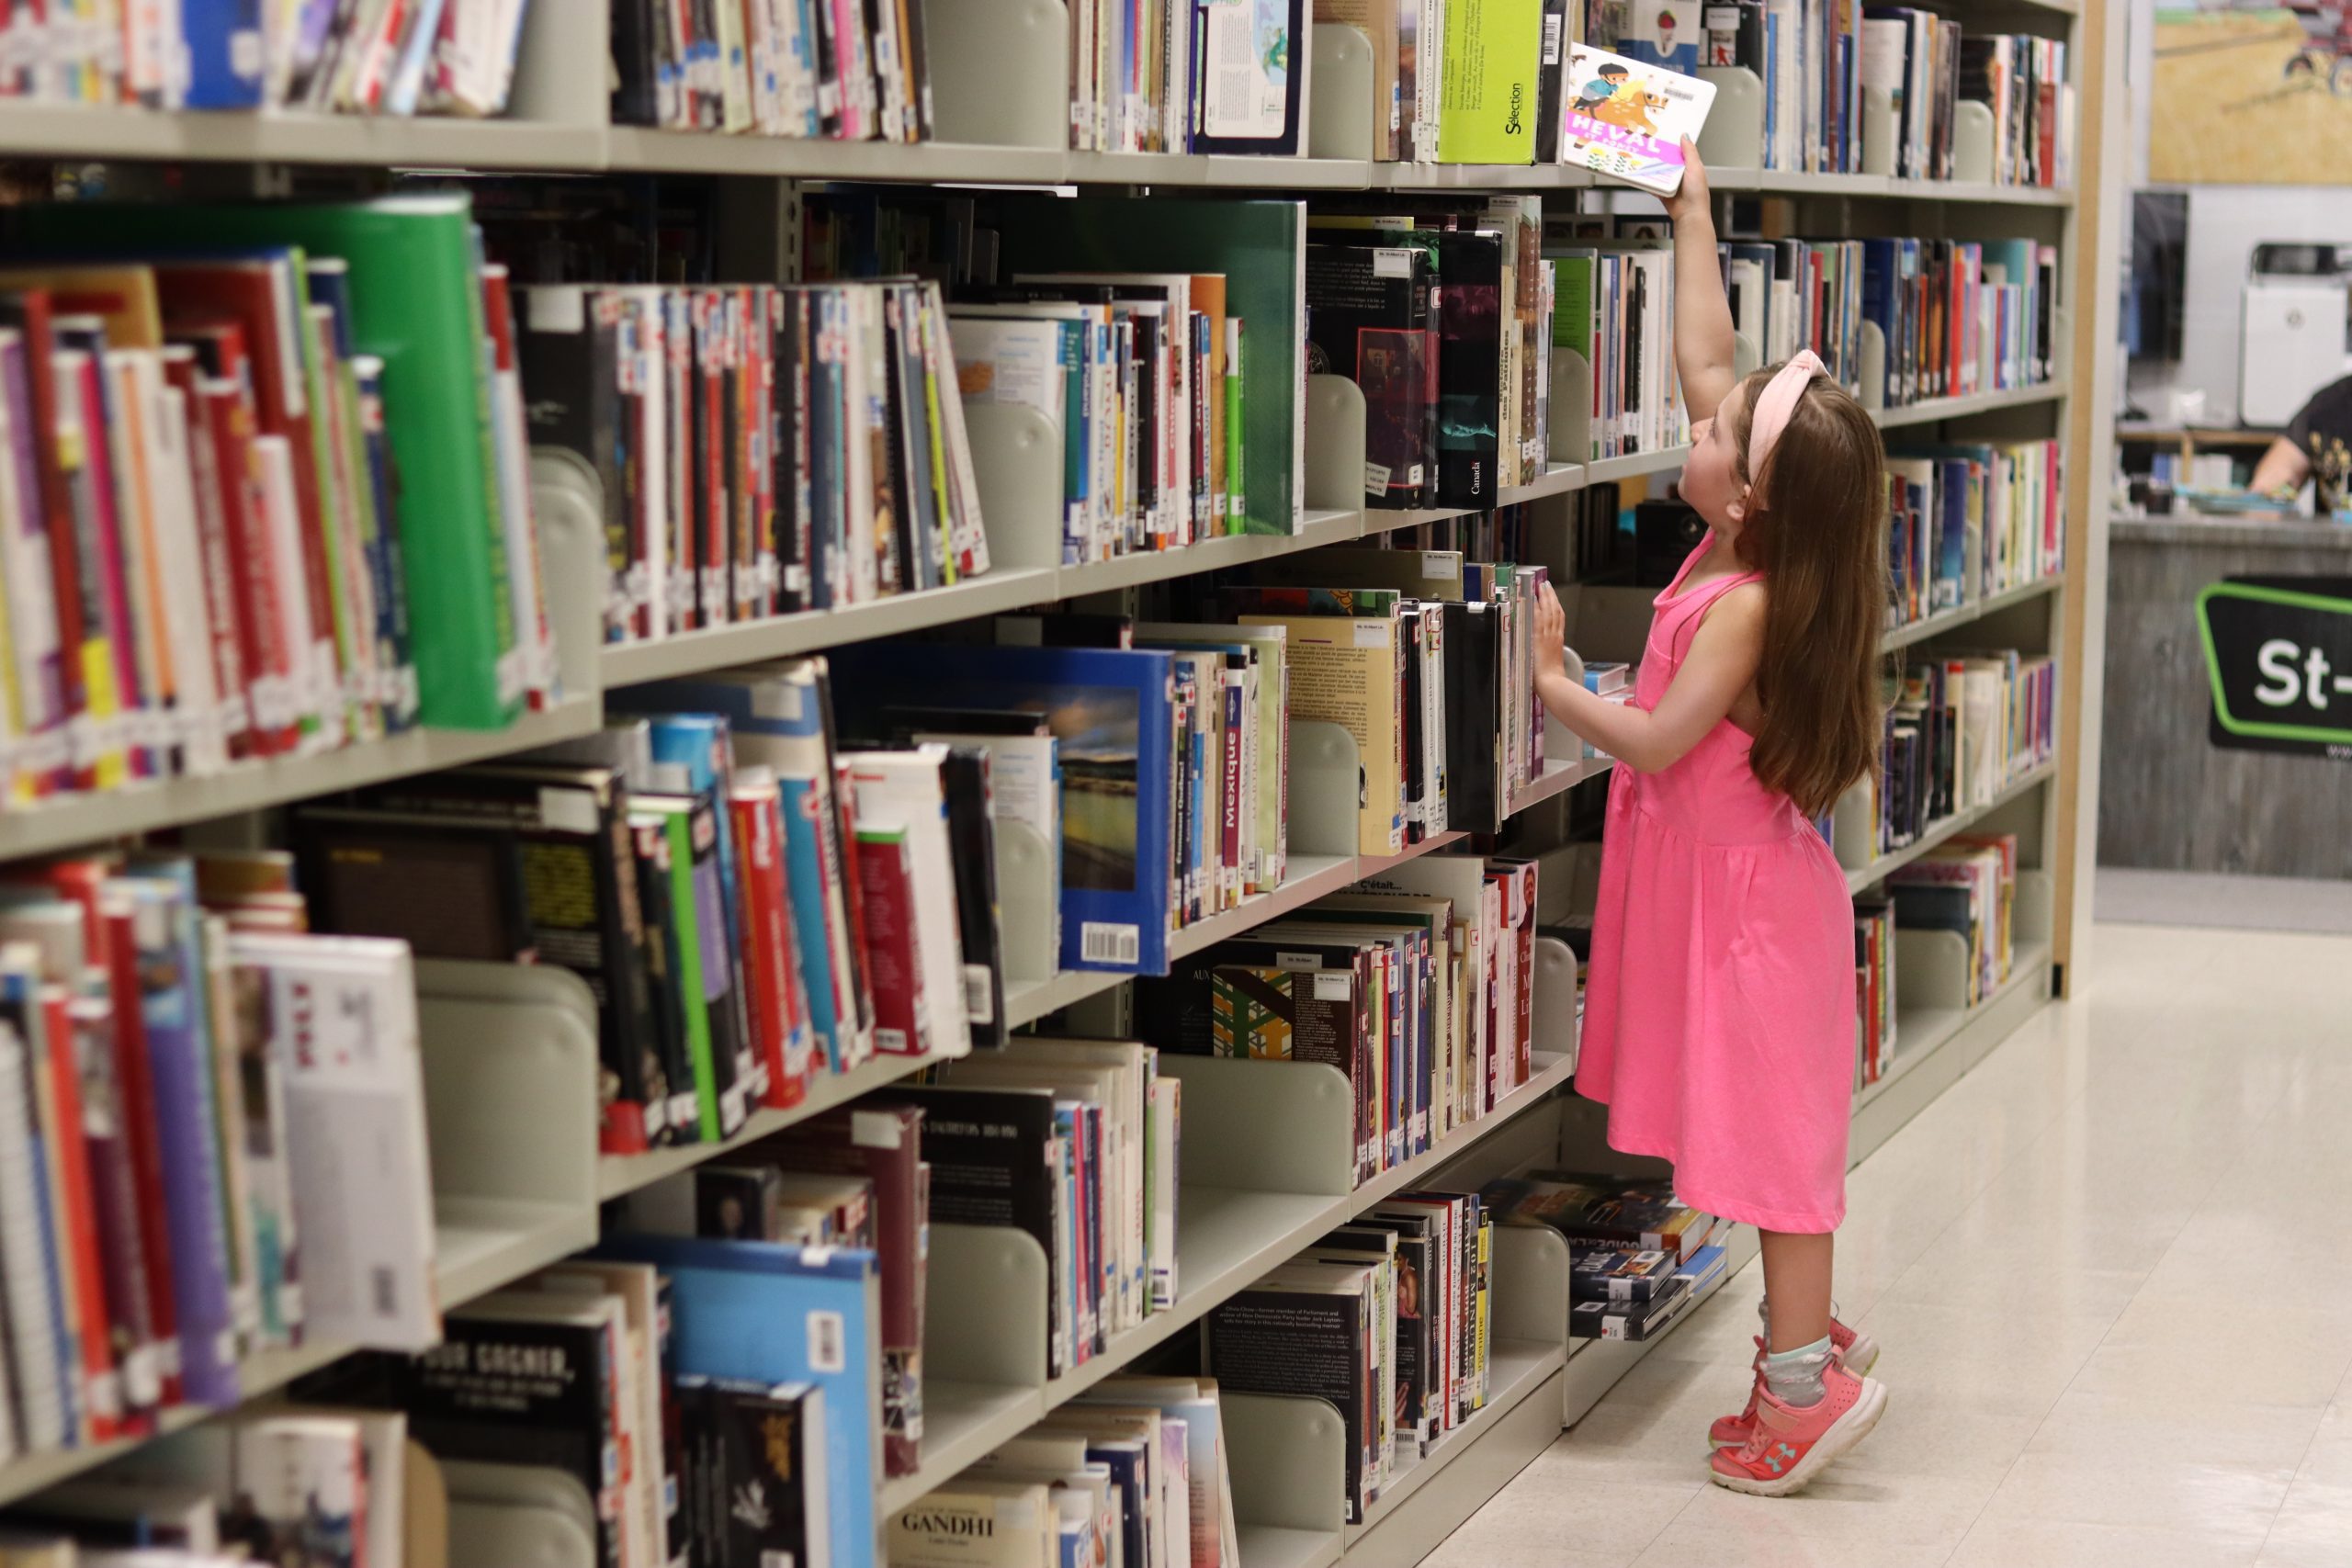 Girl in pink dress choosing a book from the top self of the library.